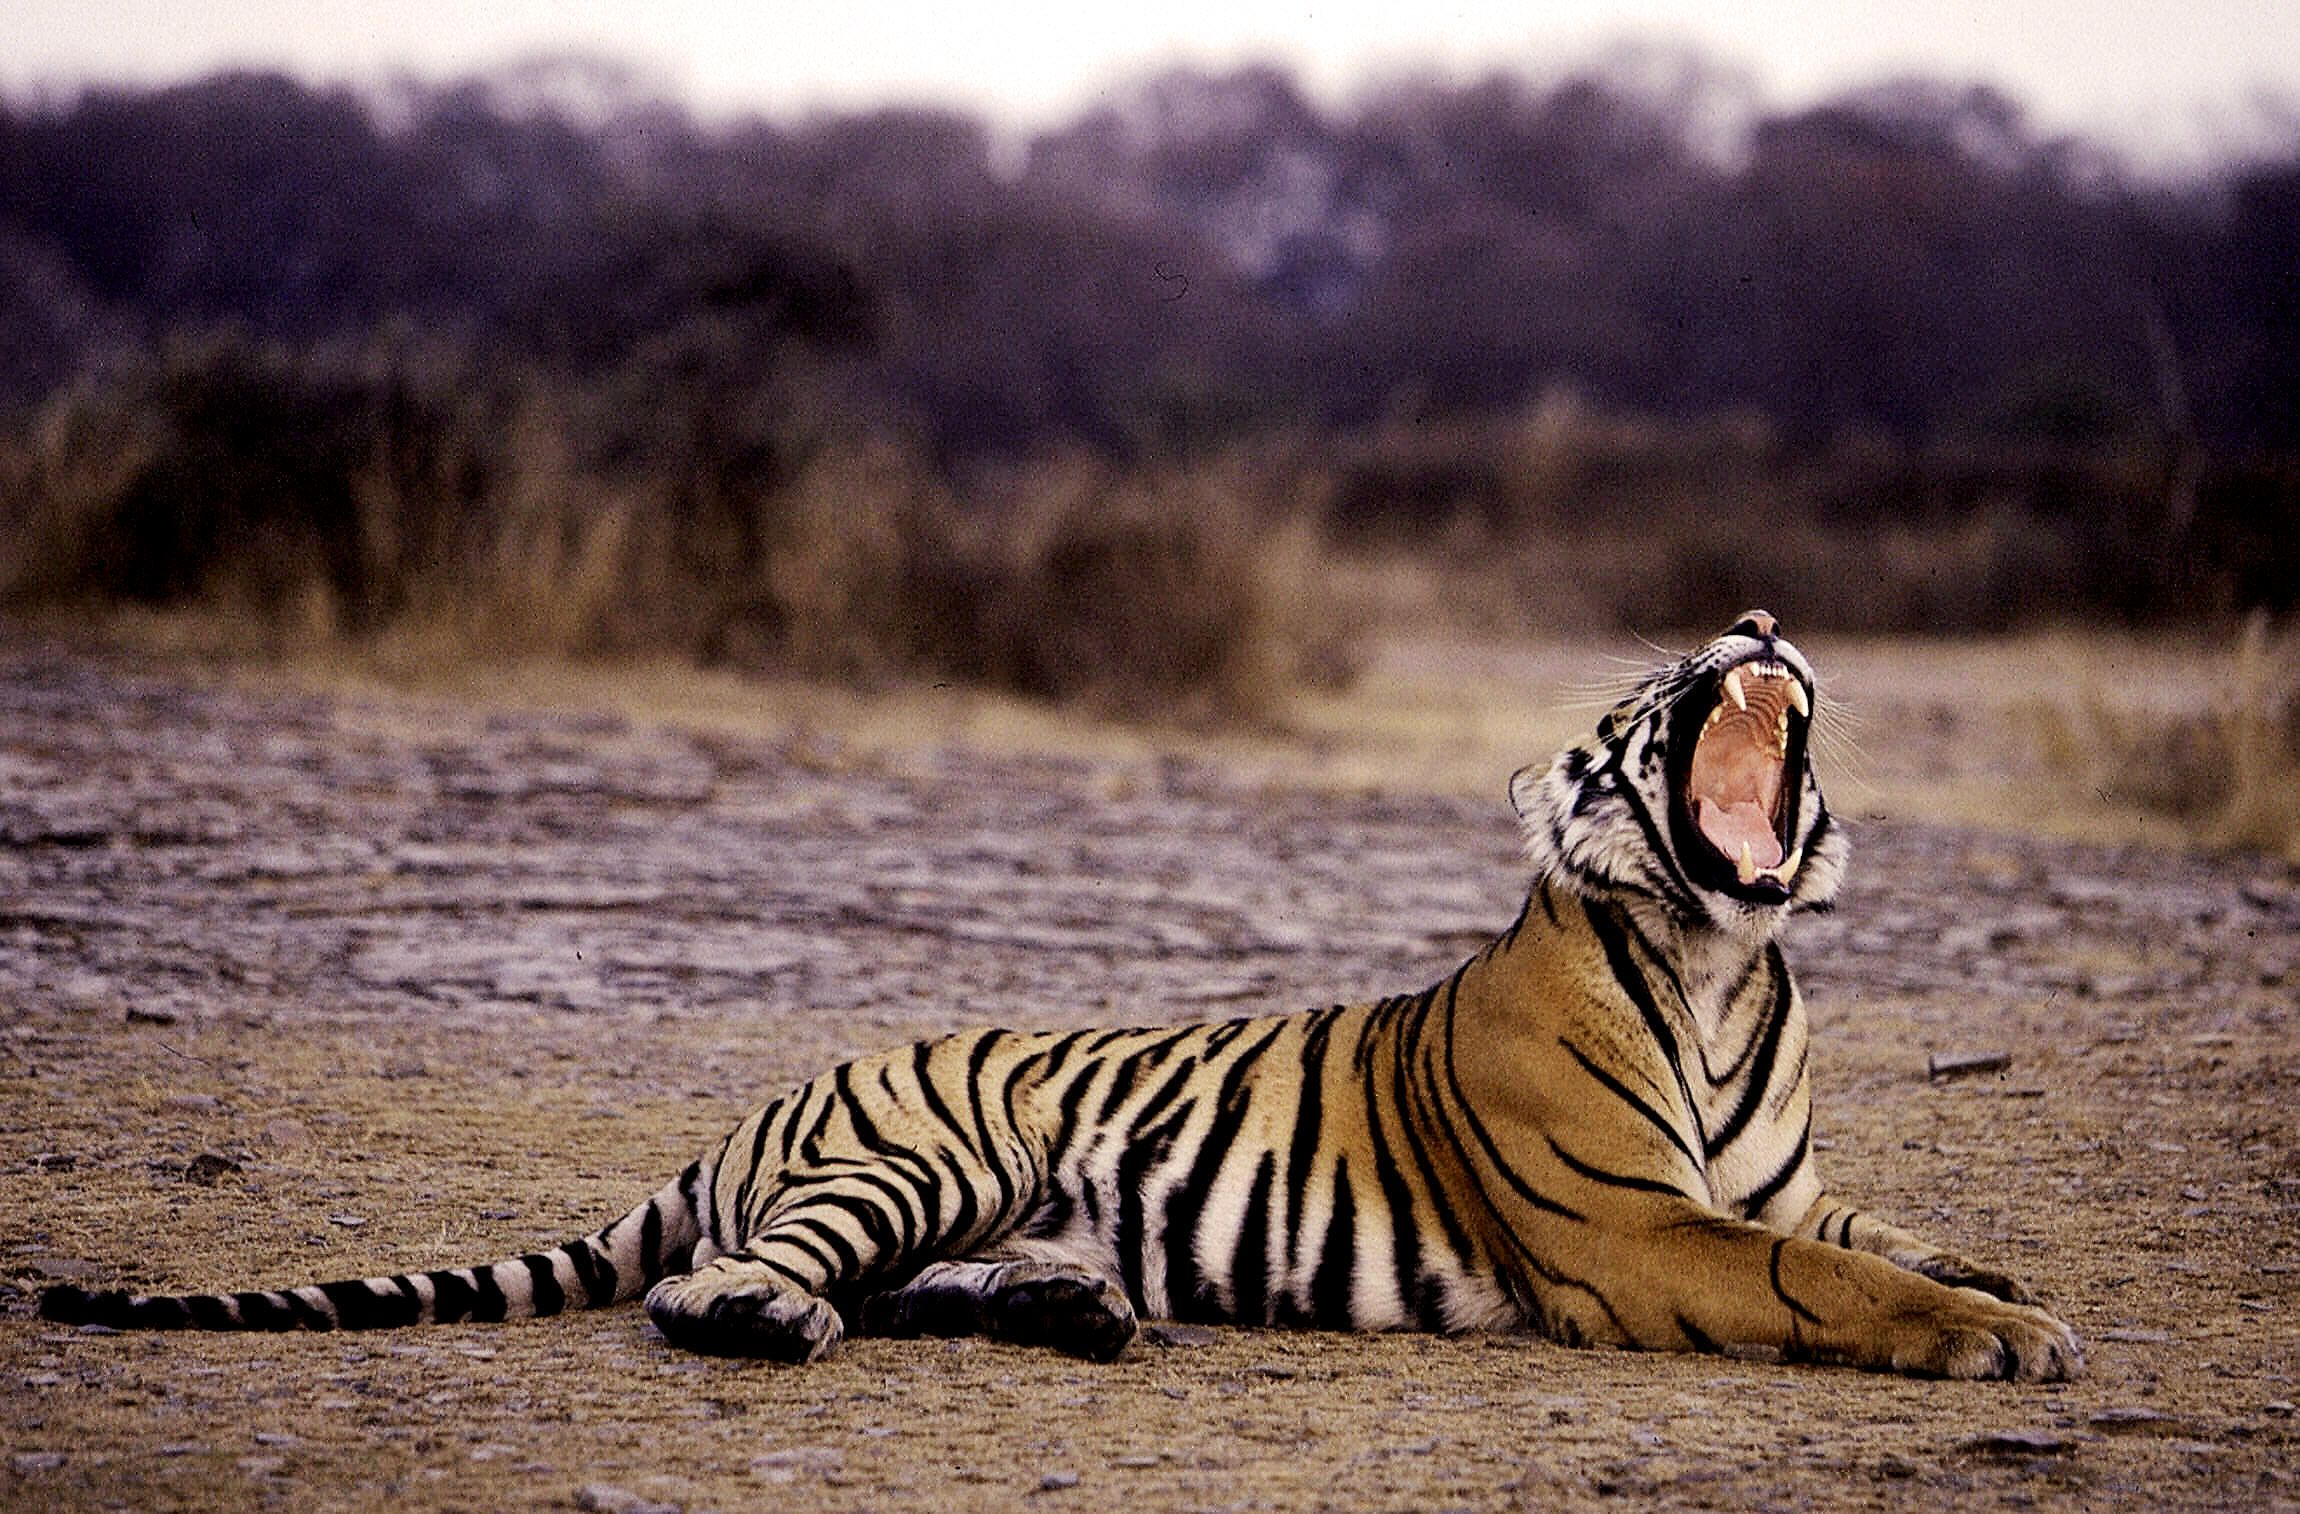 Tigers in India: 5 best places to see one | CNN